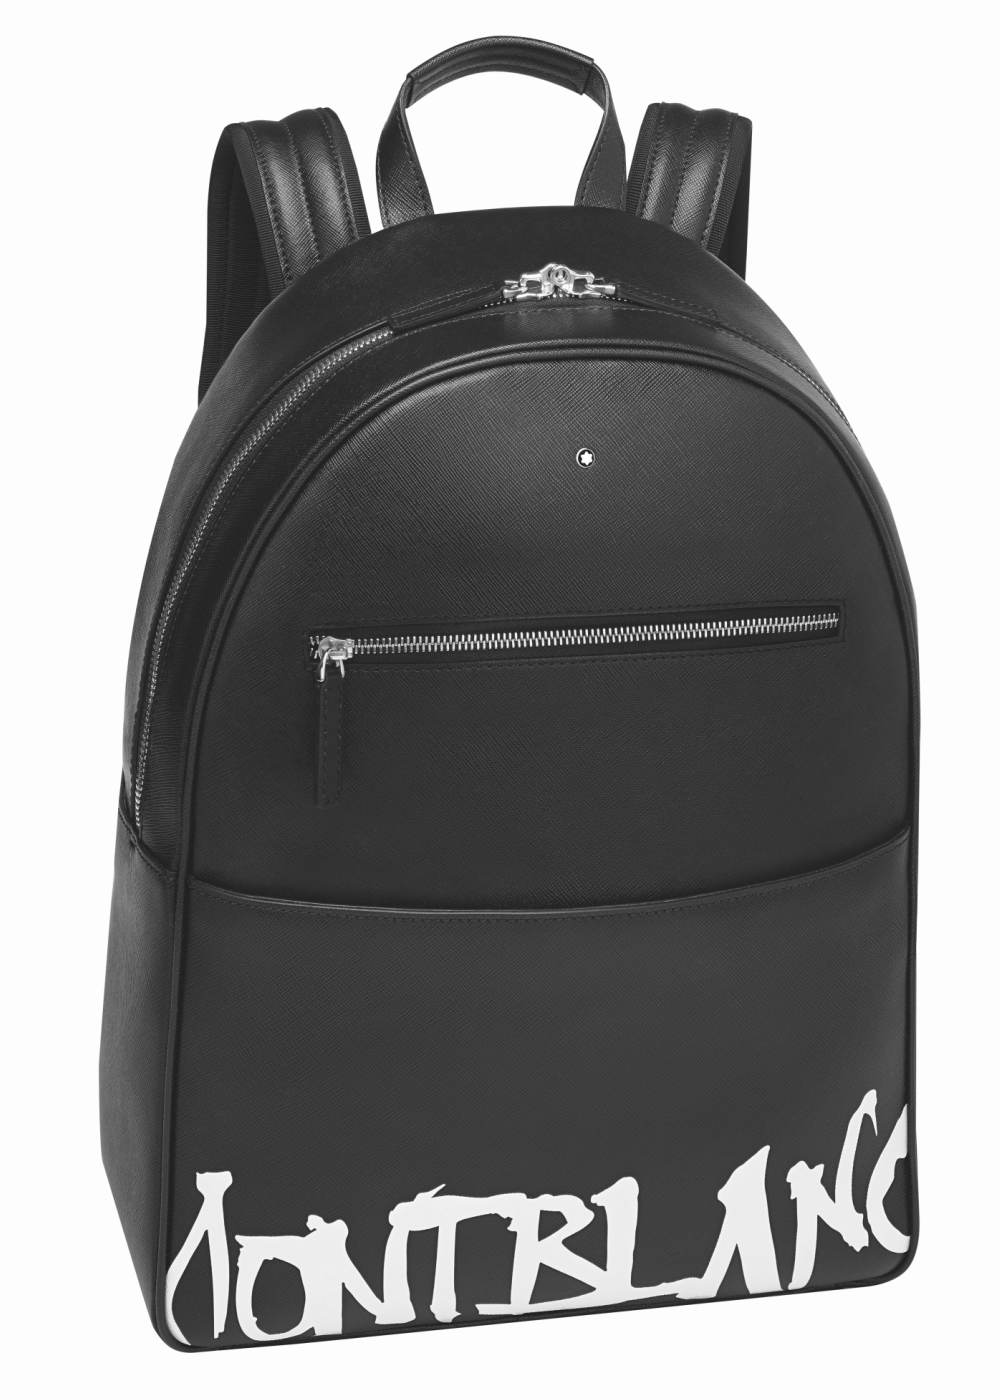 MONTBLANC SARTORIAL CALLIGRAPHY COLLECTION Genuine Leather Backpack - 男士书法皮革胶囊系列：Montblanc Sartorial Calligraphy